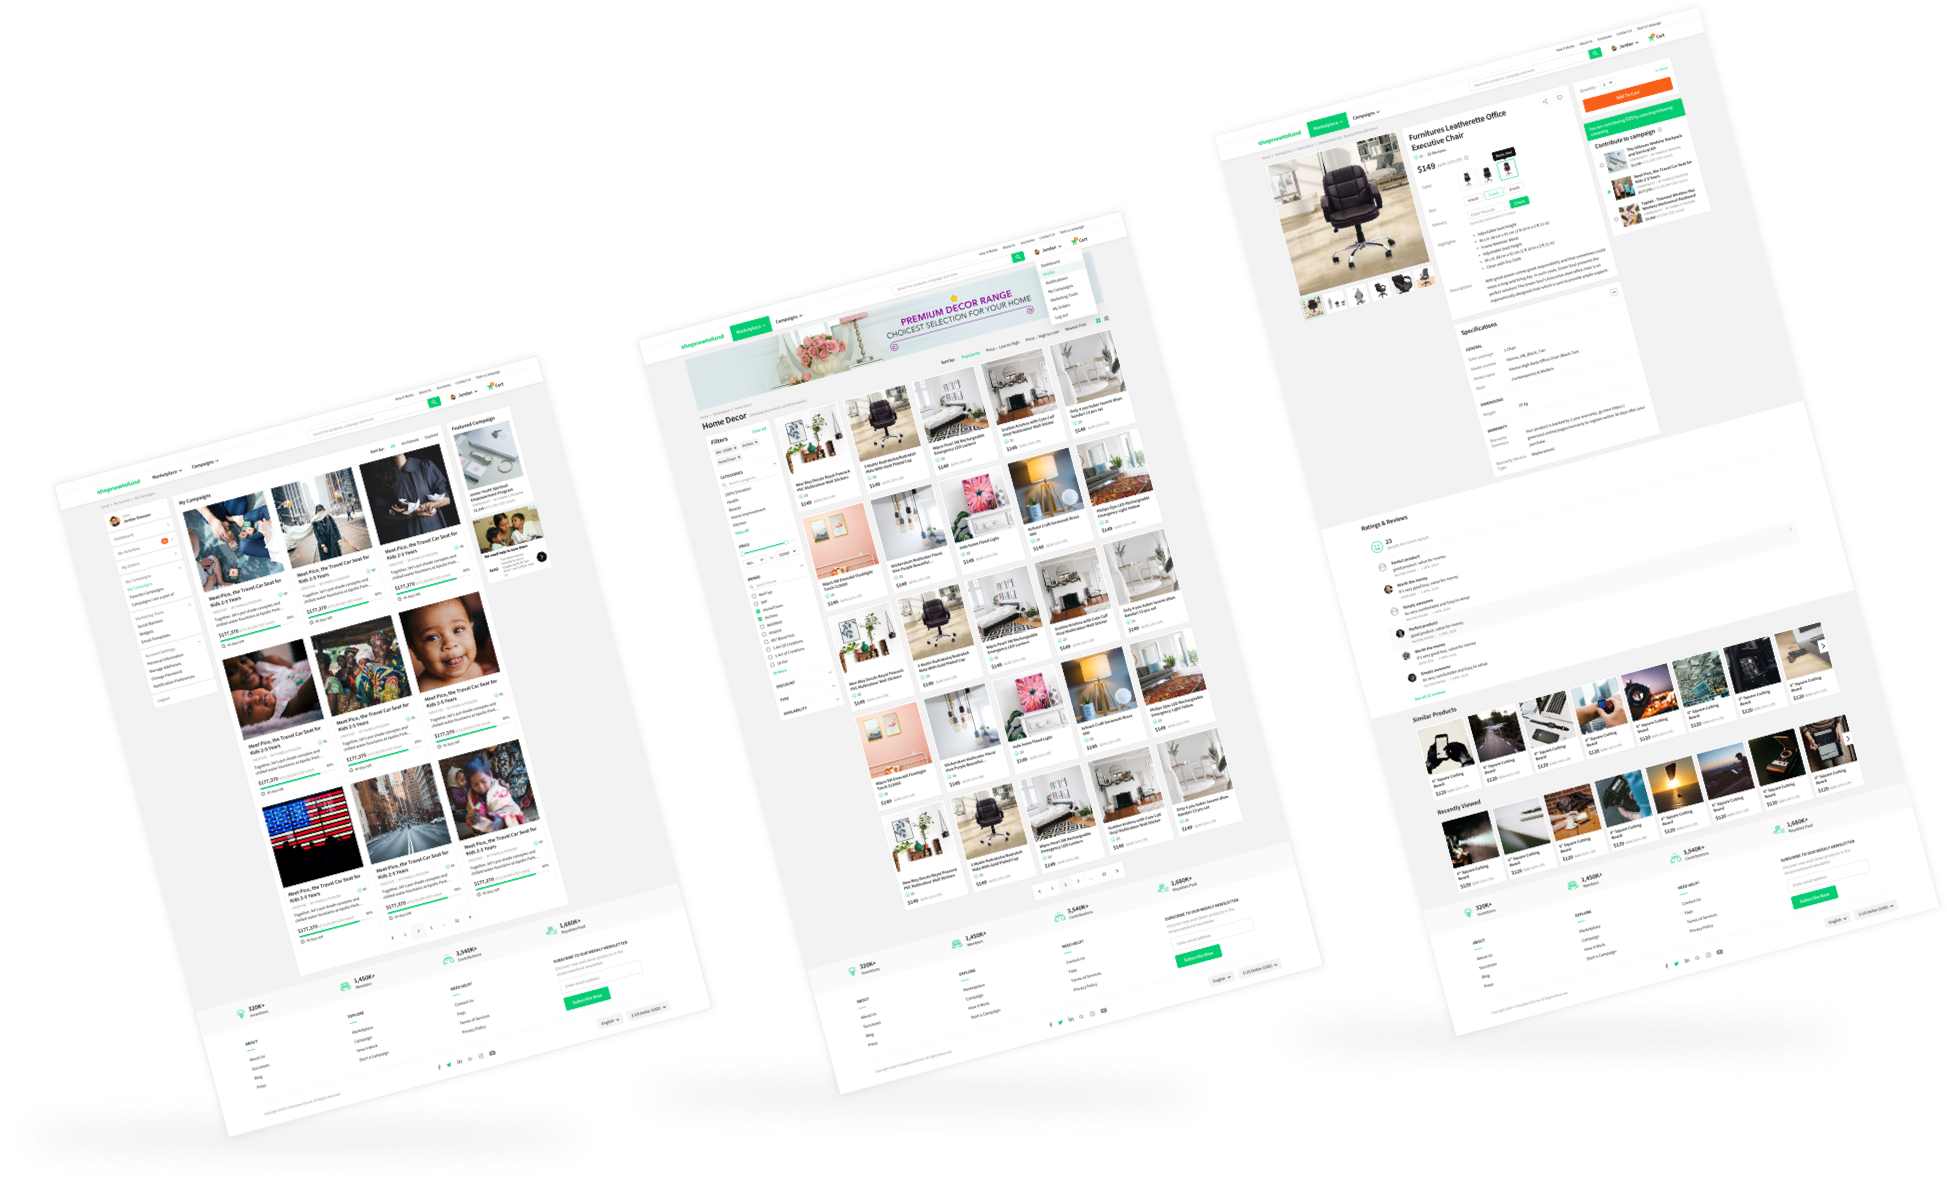 Pages of an ecommerece marketplace